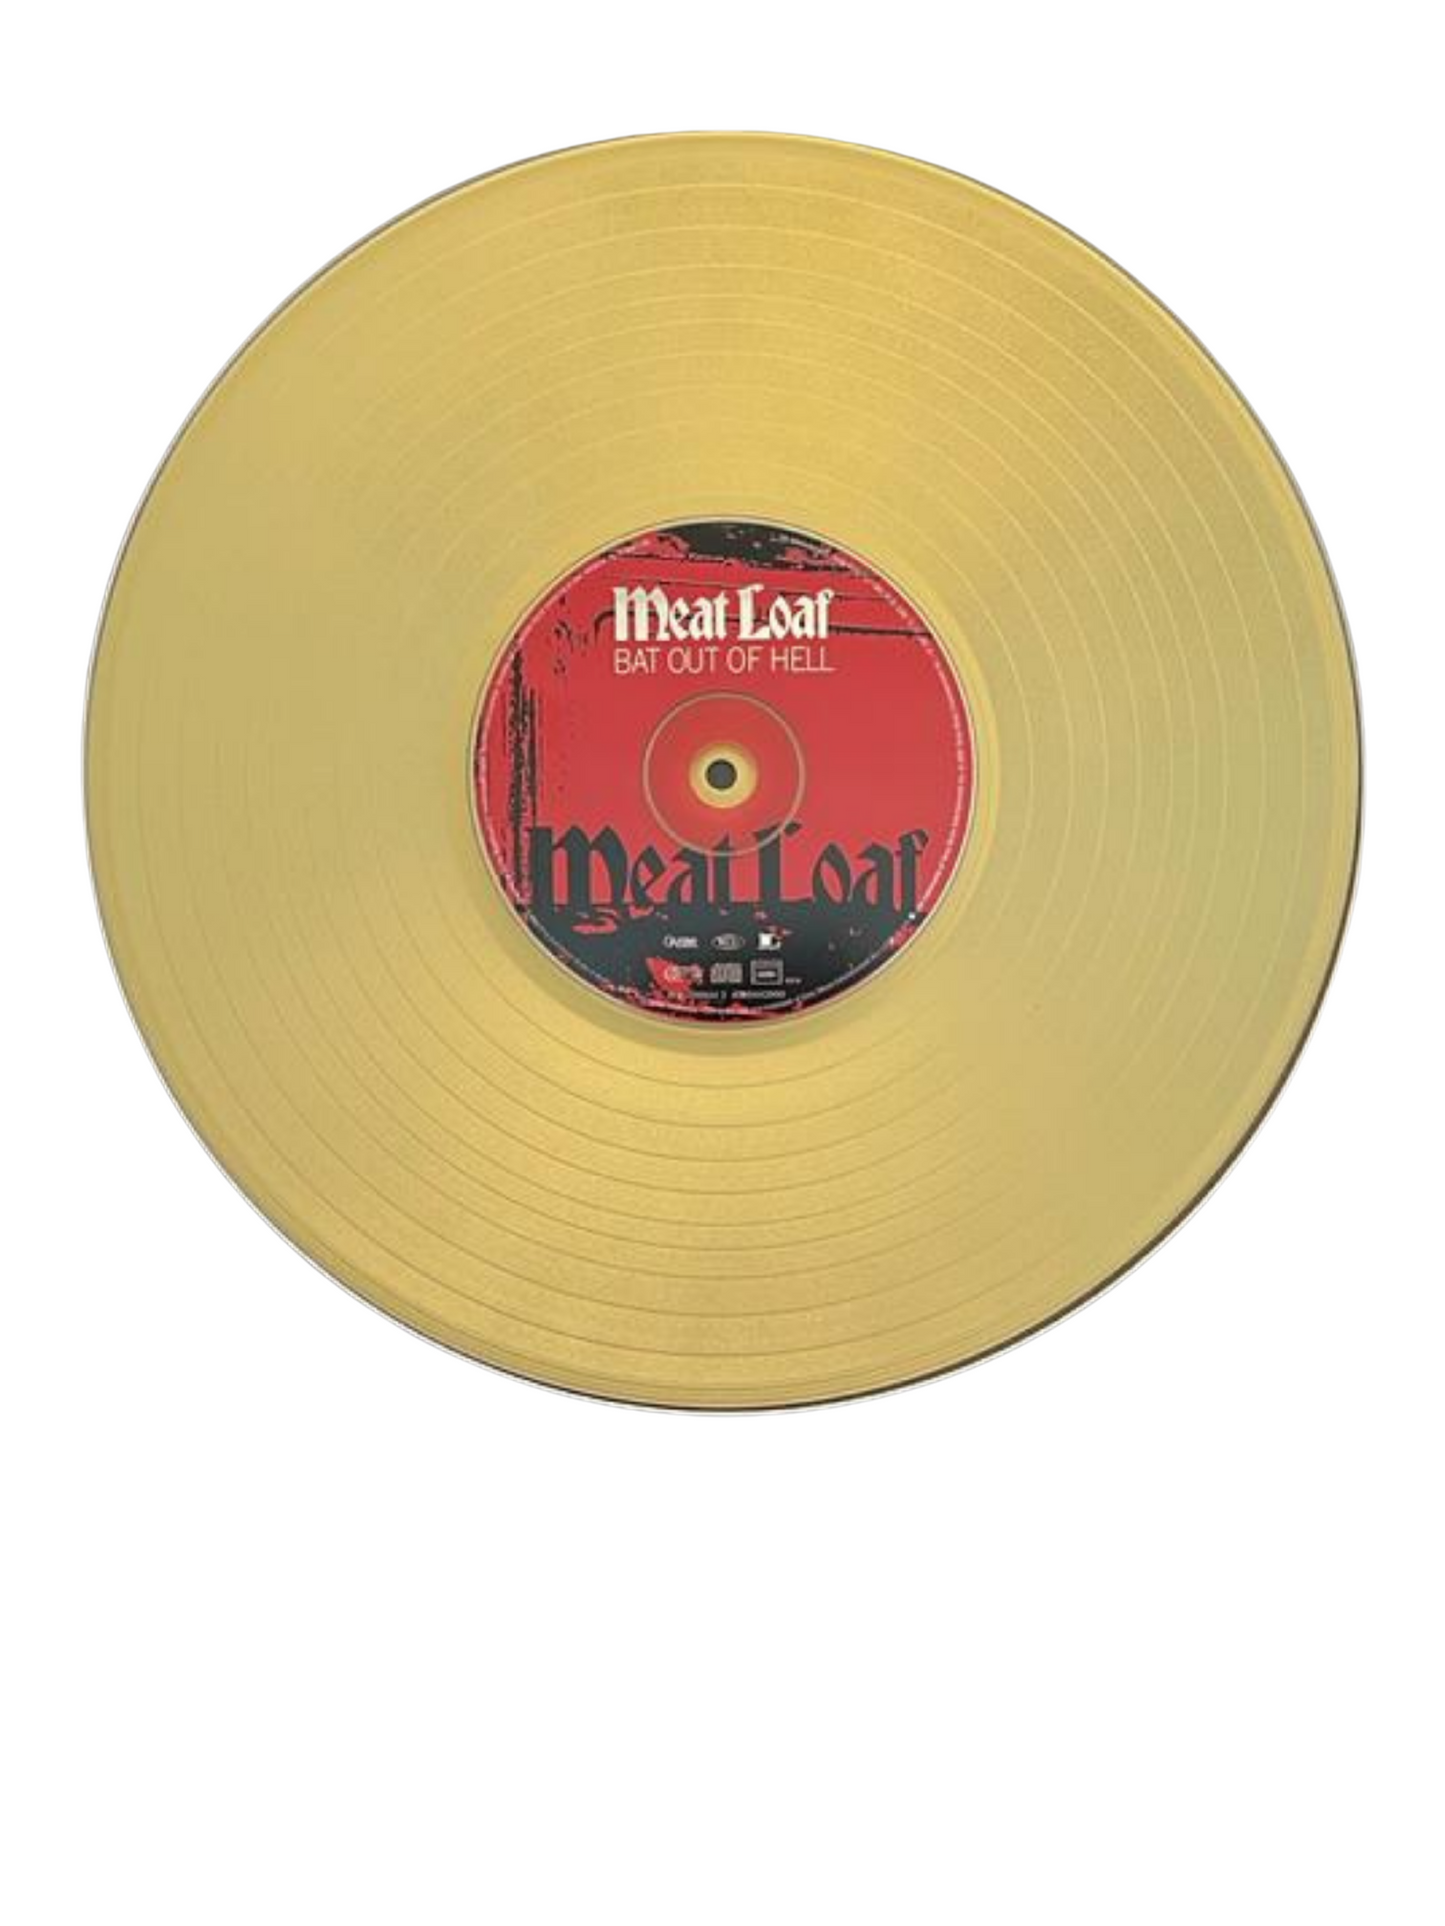 MEAT LOAF - Bat Out Of Hell | Gold Record & CD Presentation